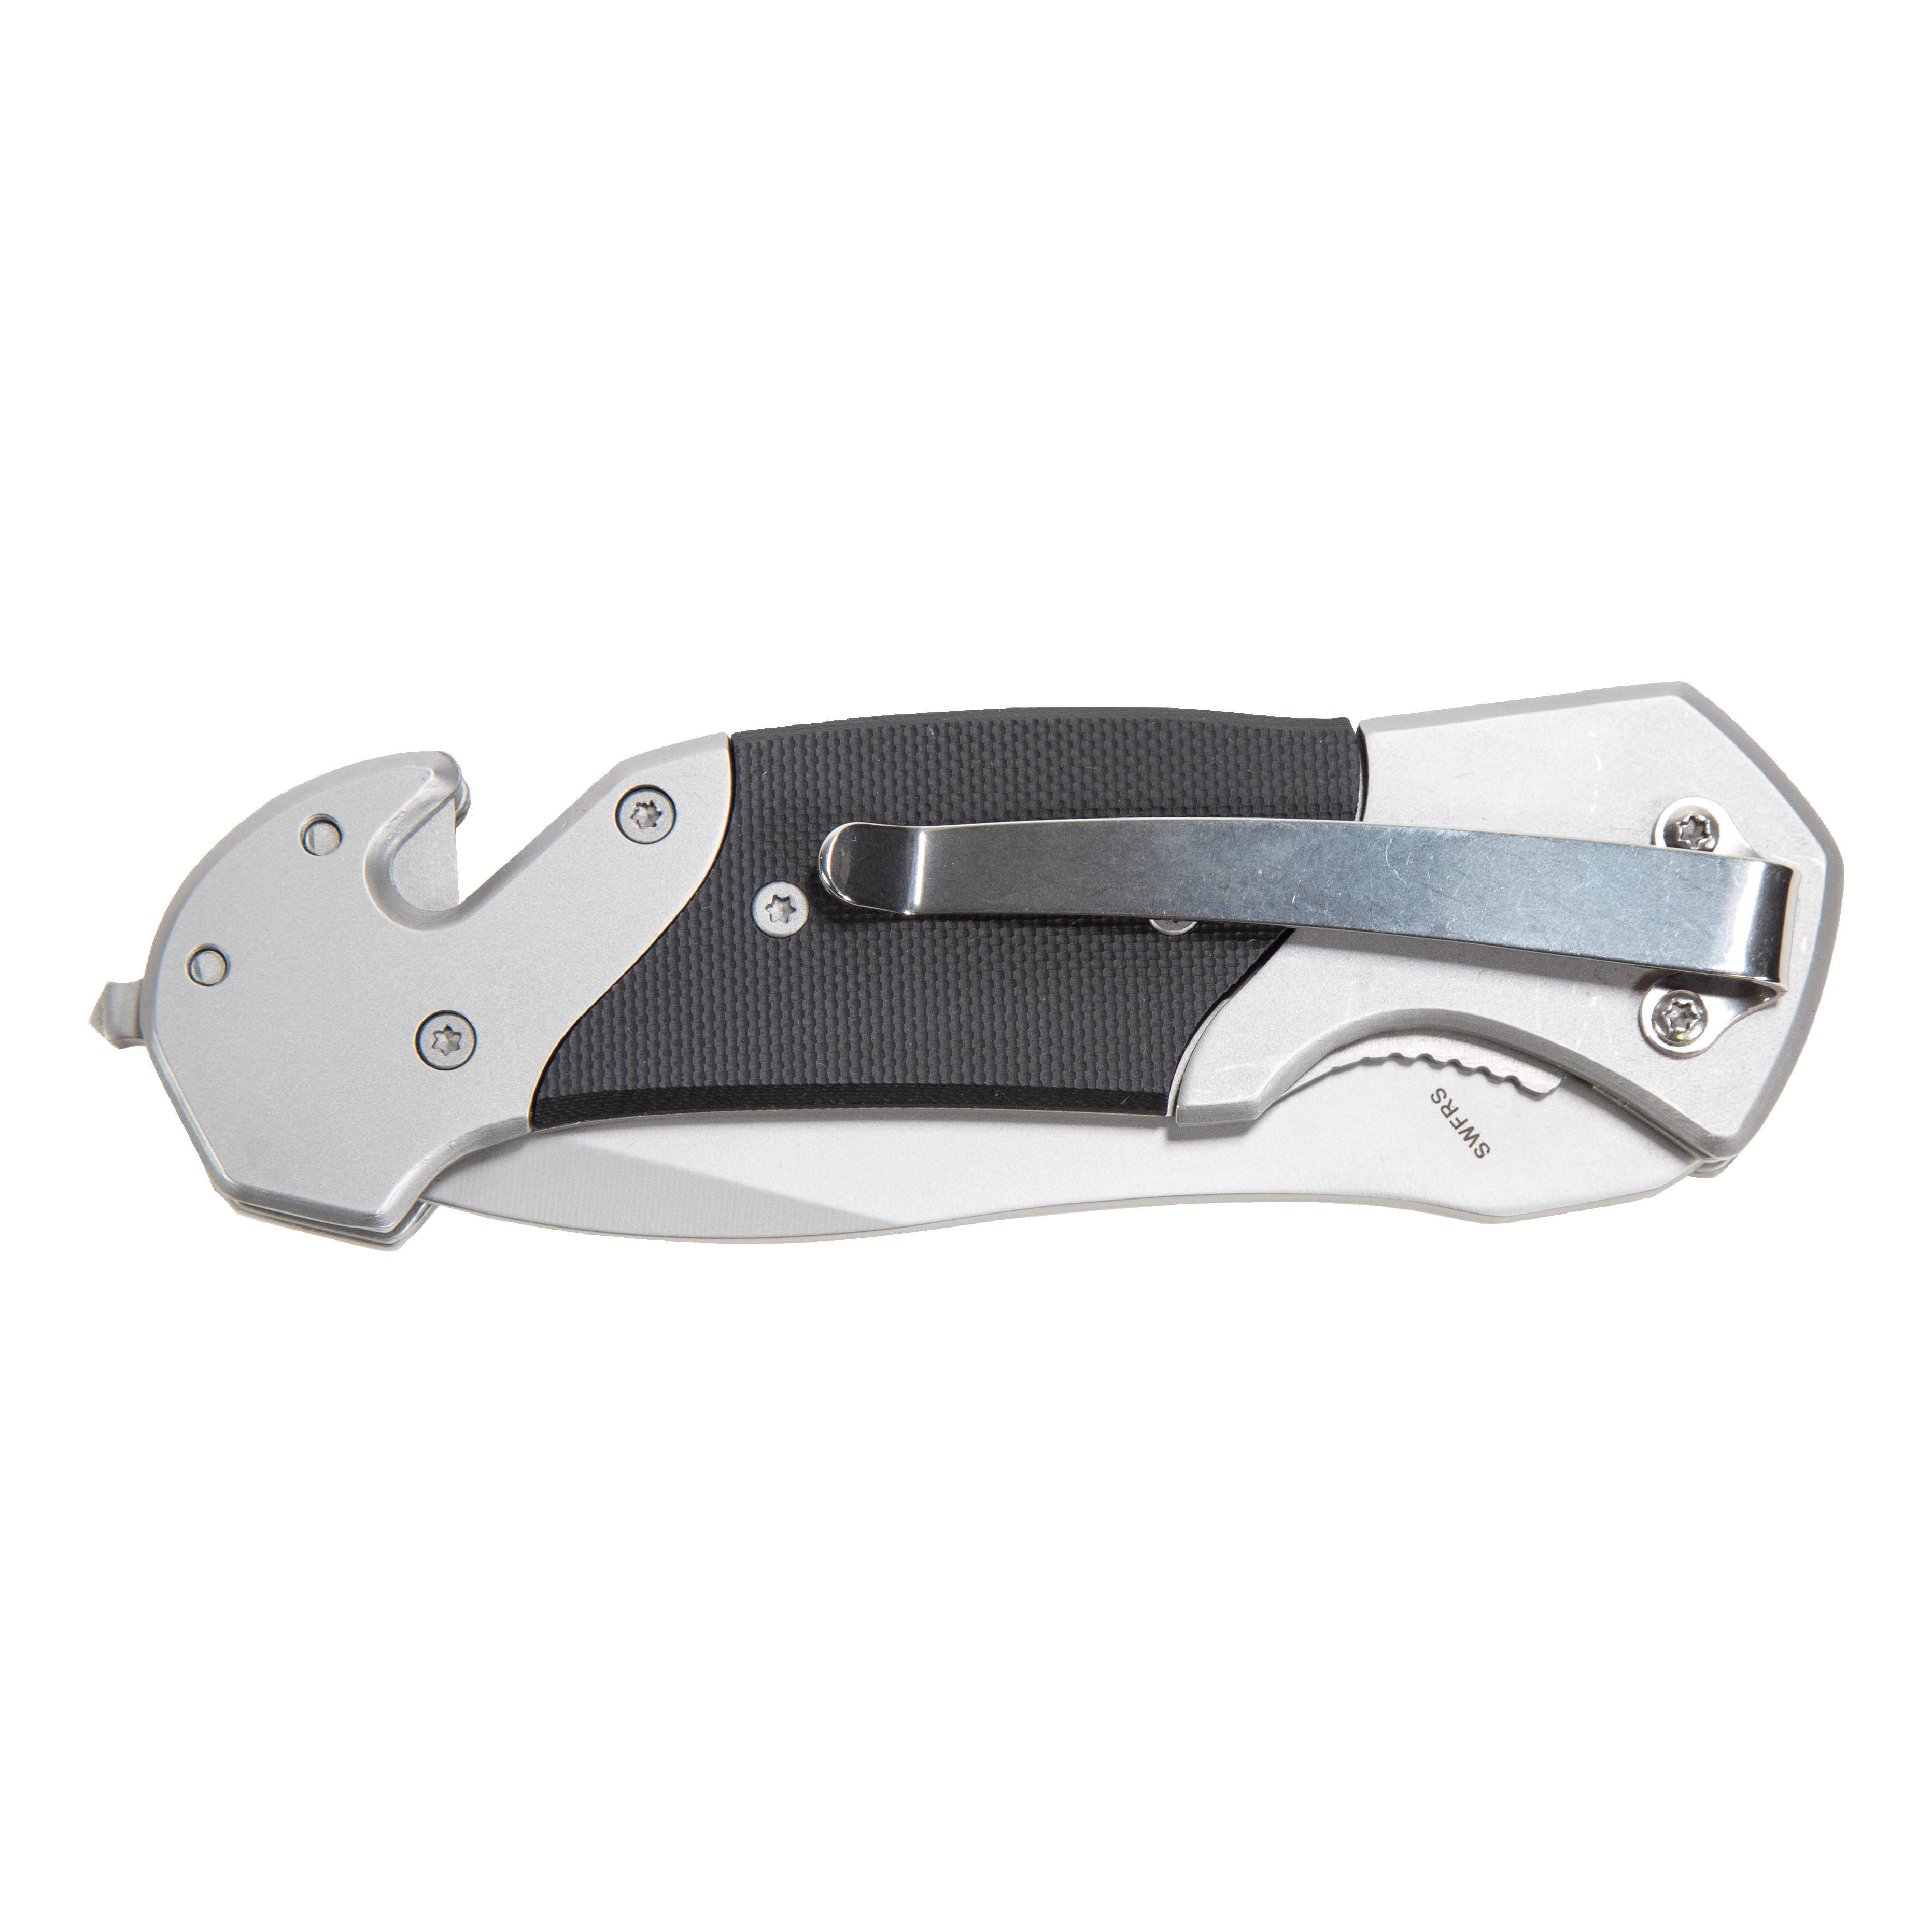 Smith & Wesson® 1st Response Liner Lock Folding Knife 